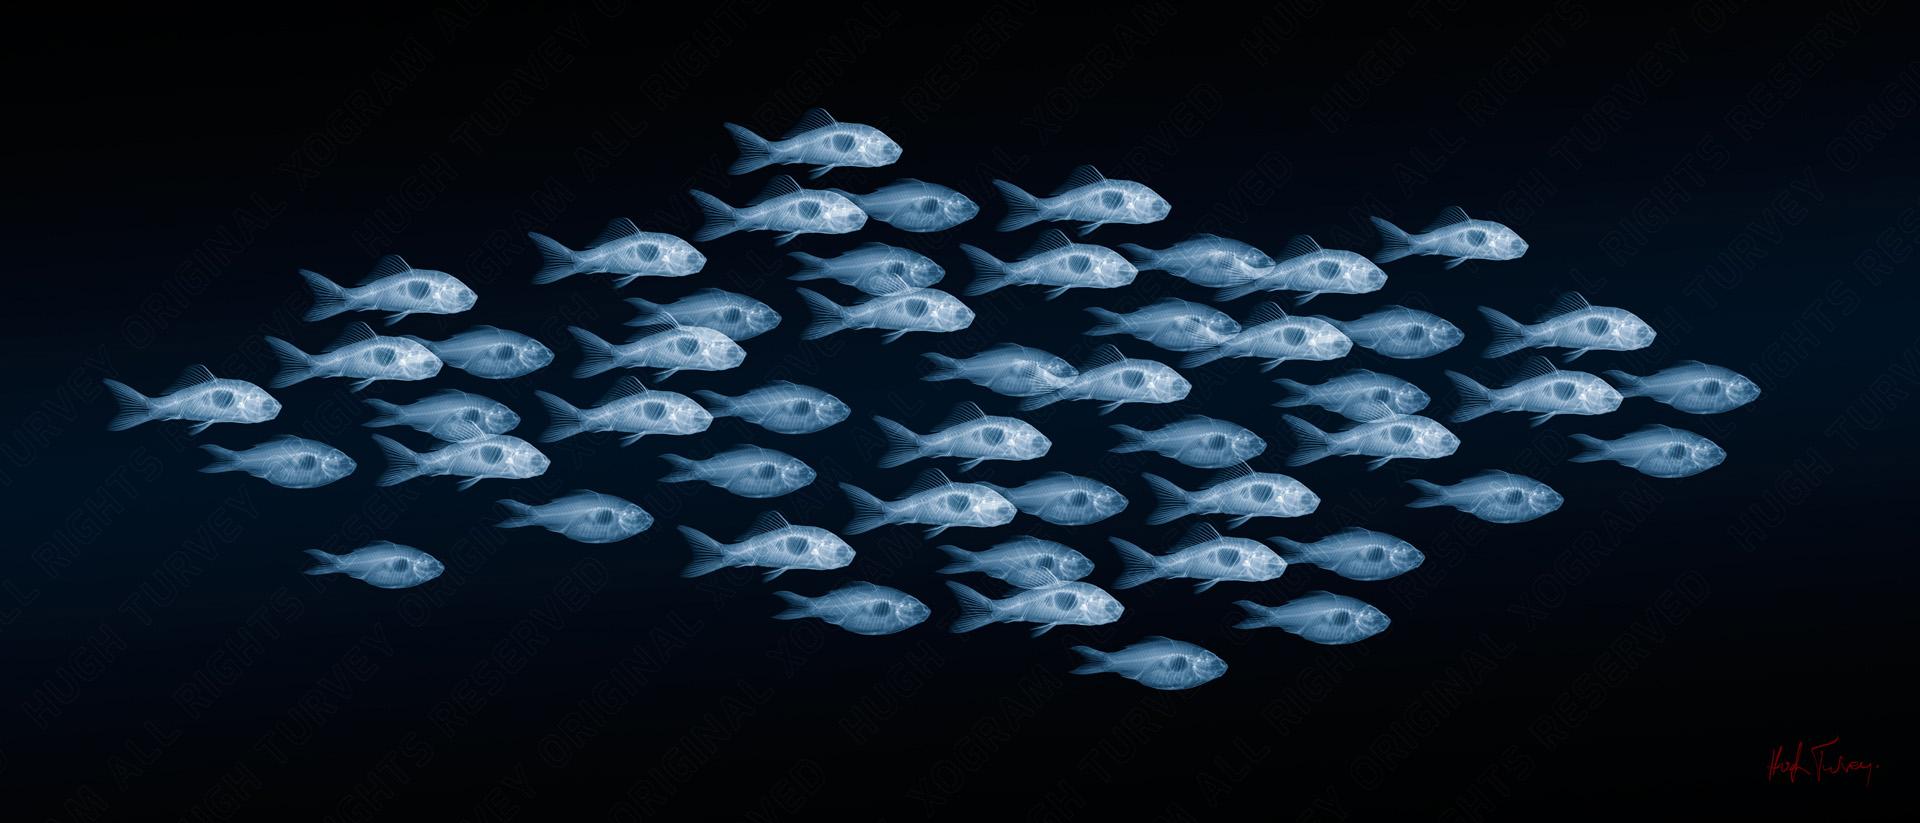 Shoaling and Schooling - contemporary fish dibond giclee print - Photograph by Hugh Turvey